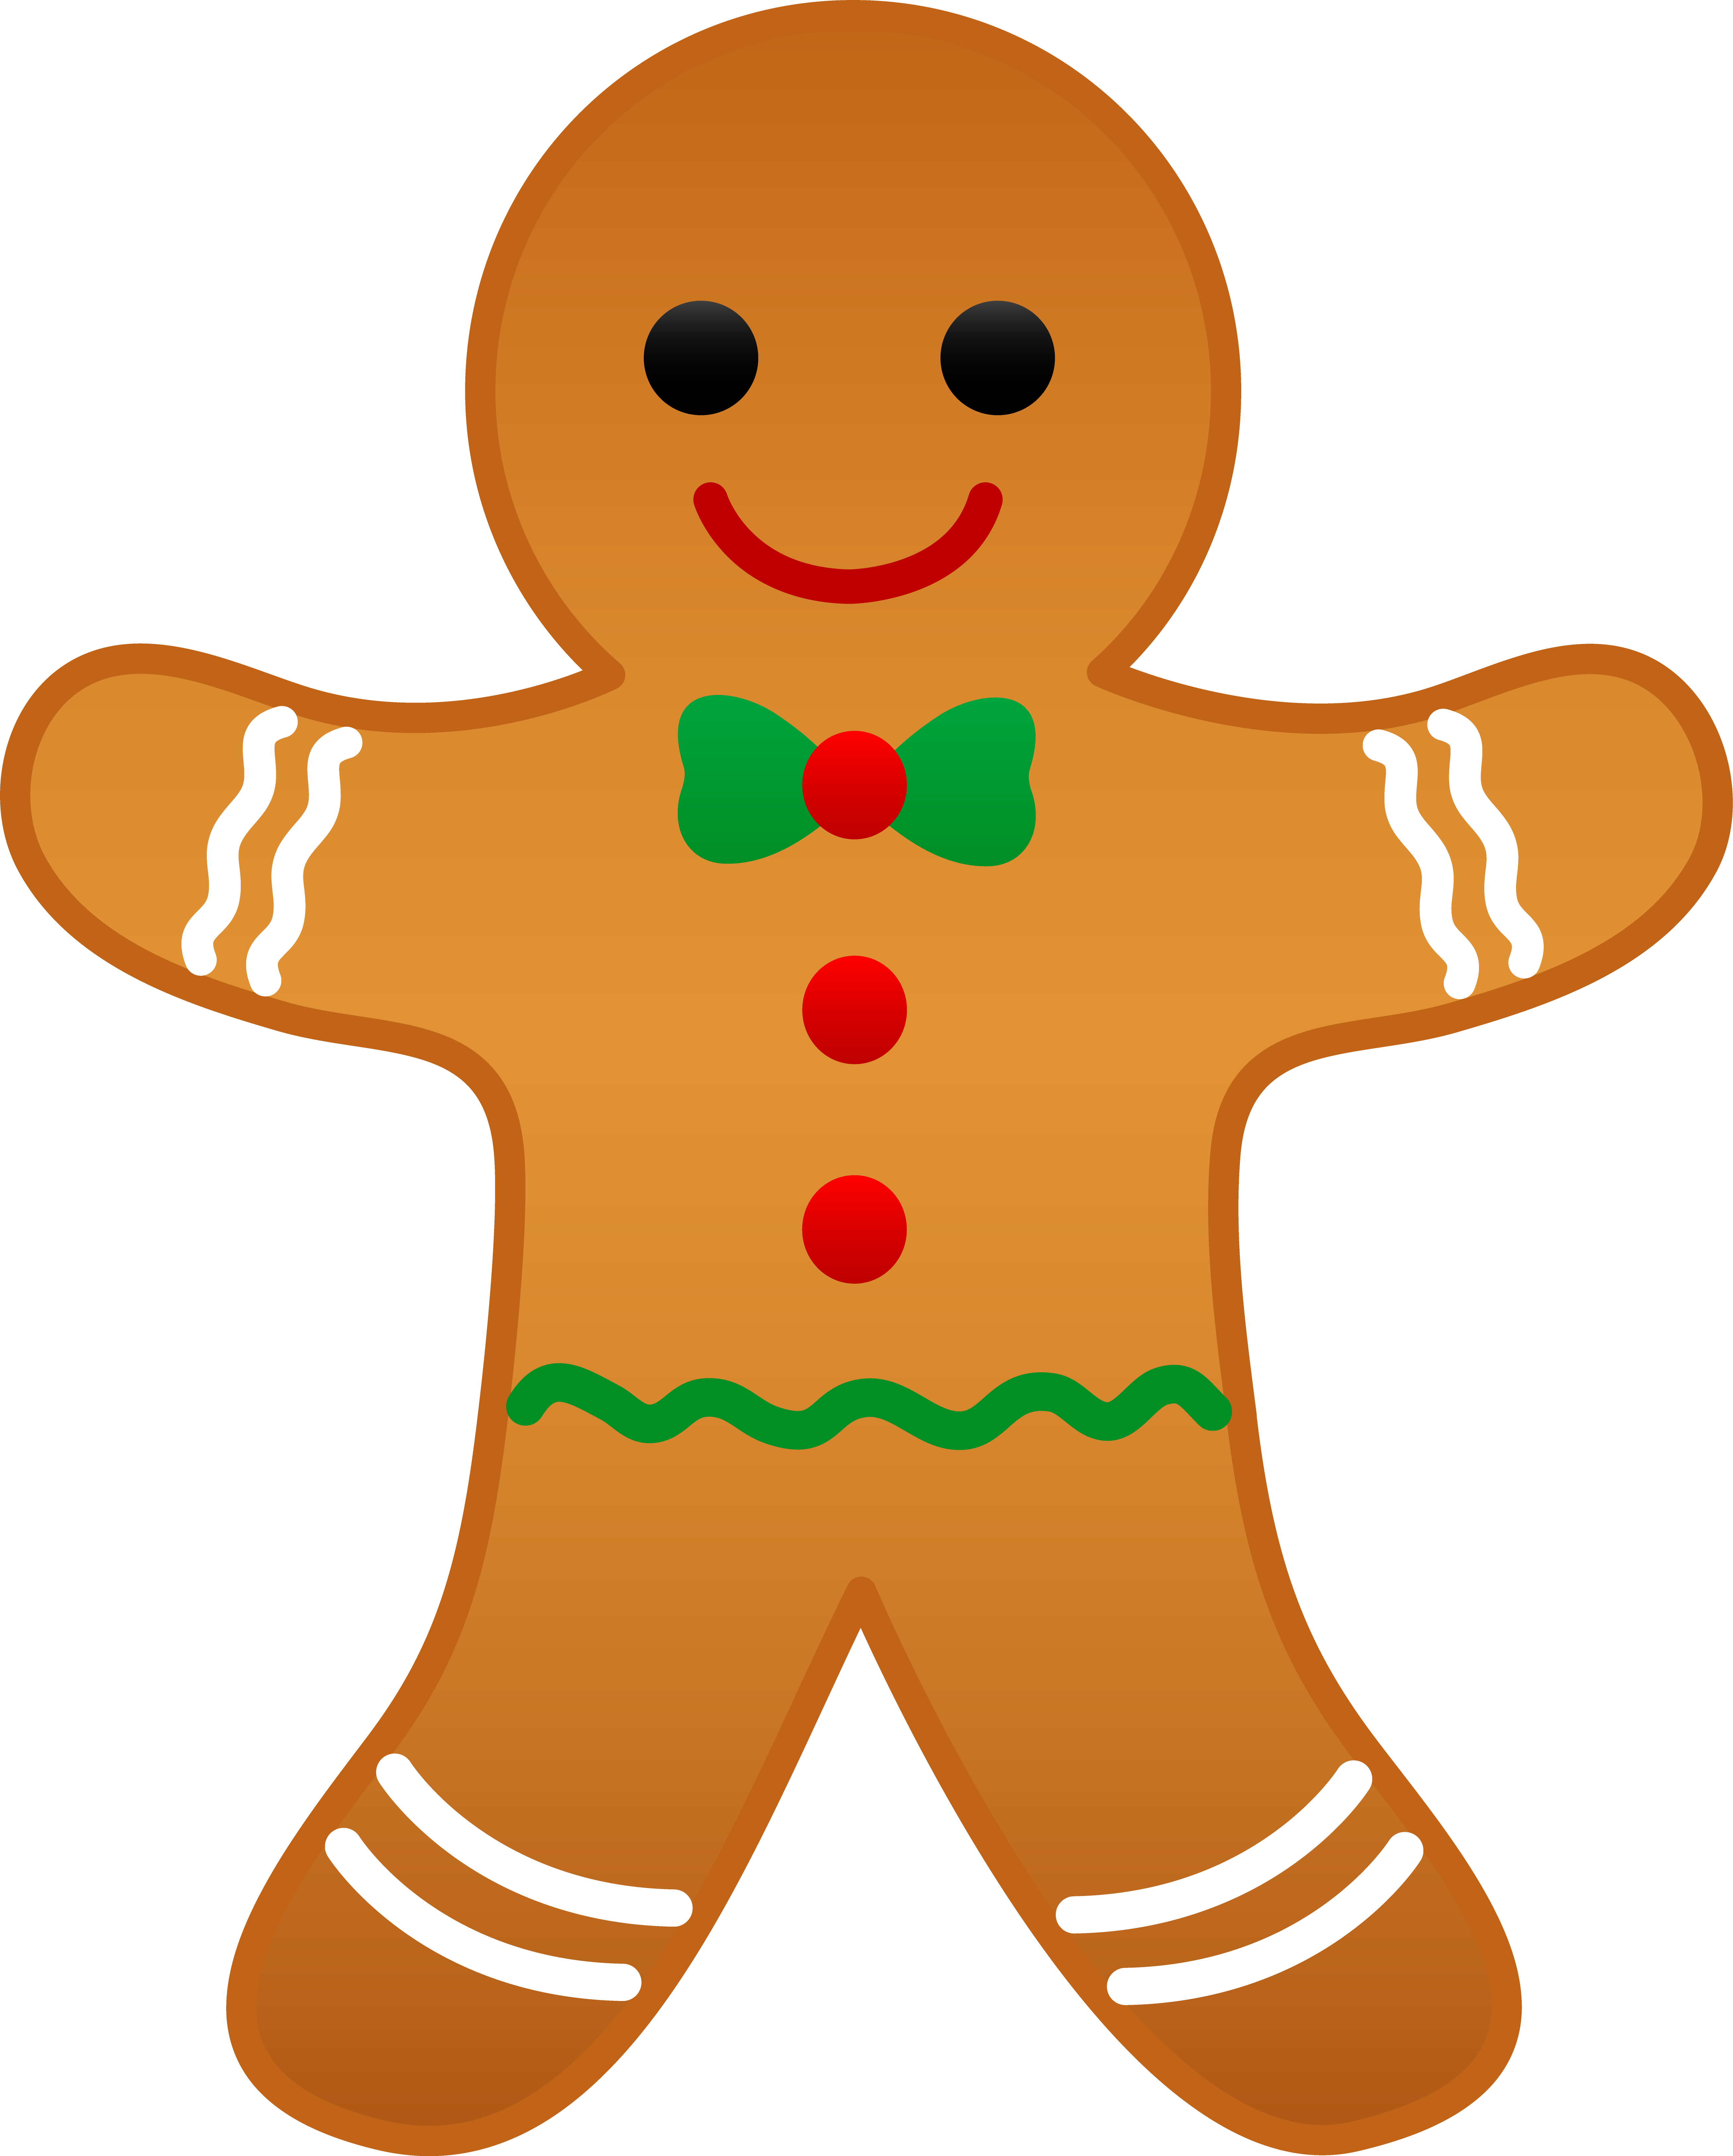 Cookies clipart house. Christmas gingerbread man clip